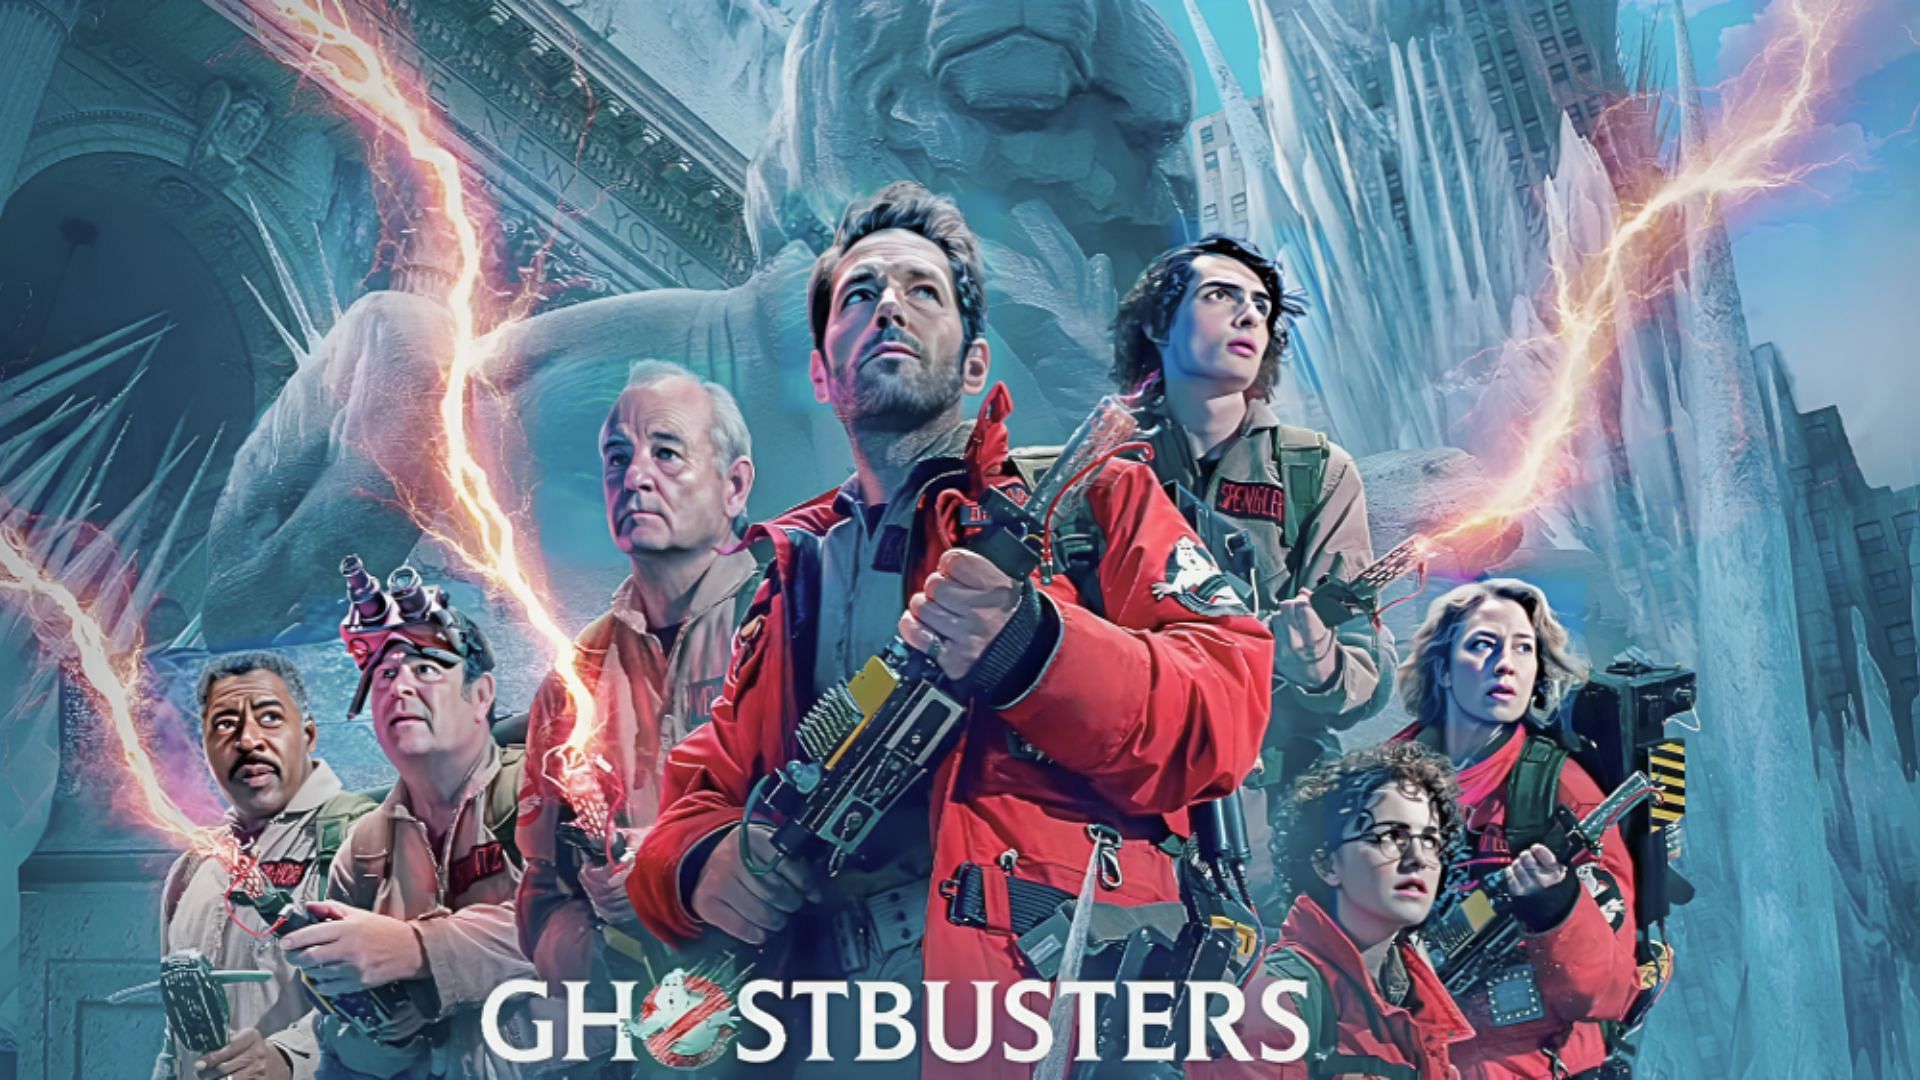 The most recent Ghostbusters movie is Ghostbusters: Frozen Empire (Image via YouTube/Ghostbusters, 1:02)